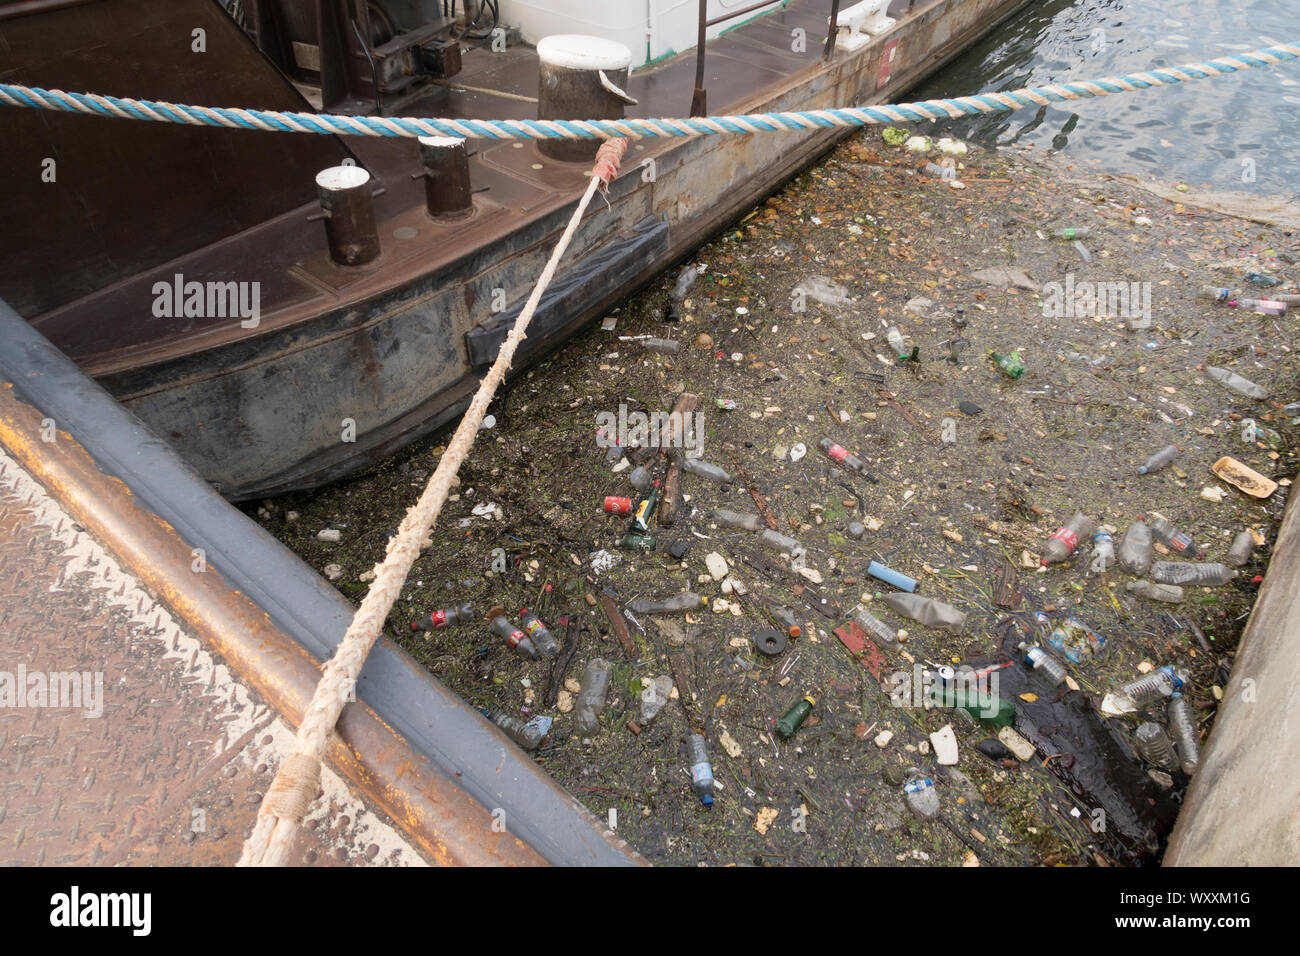 Paris, France - Aug 31, 2019: Waste and discarded rubbish collects in the water of the Seine River in Paris, France. Stock Photo